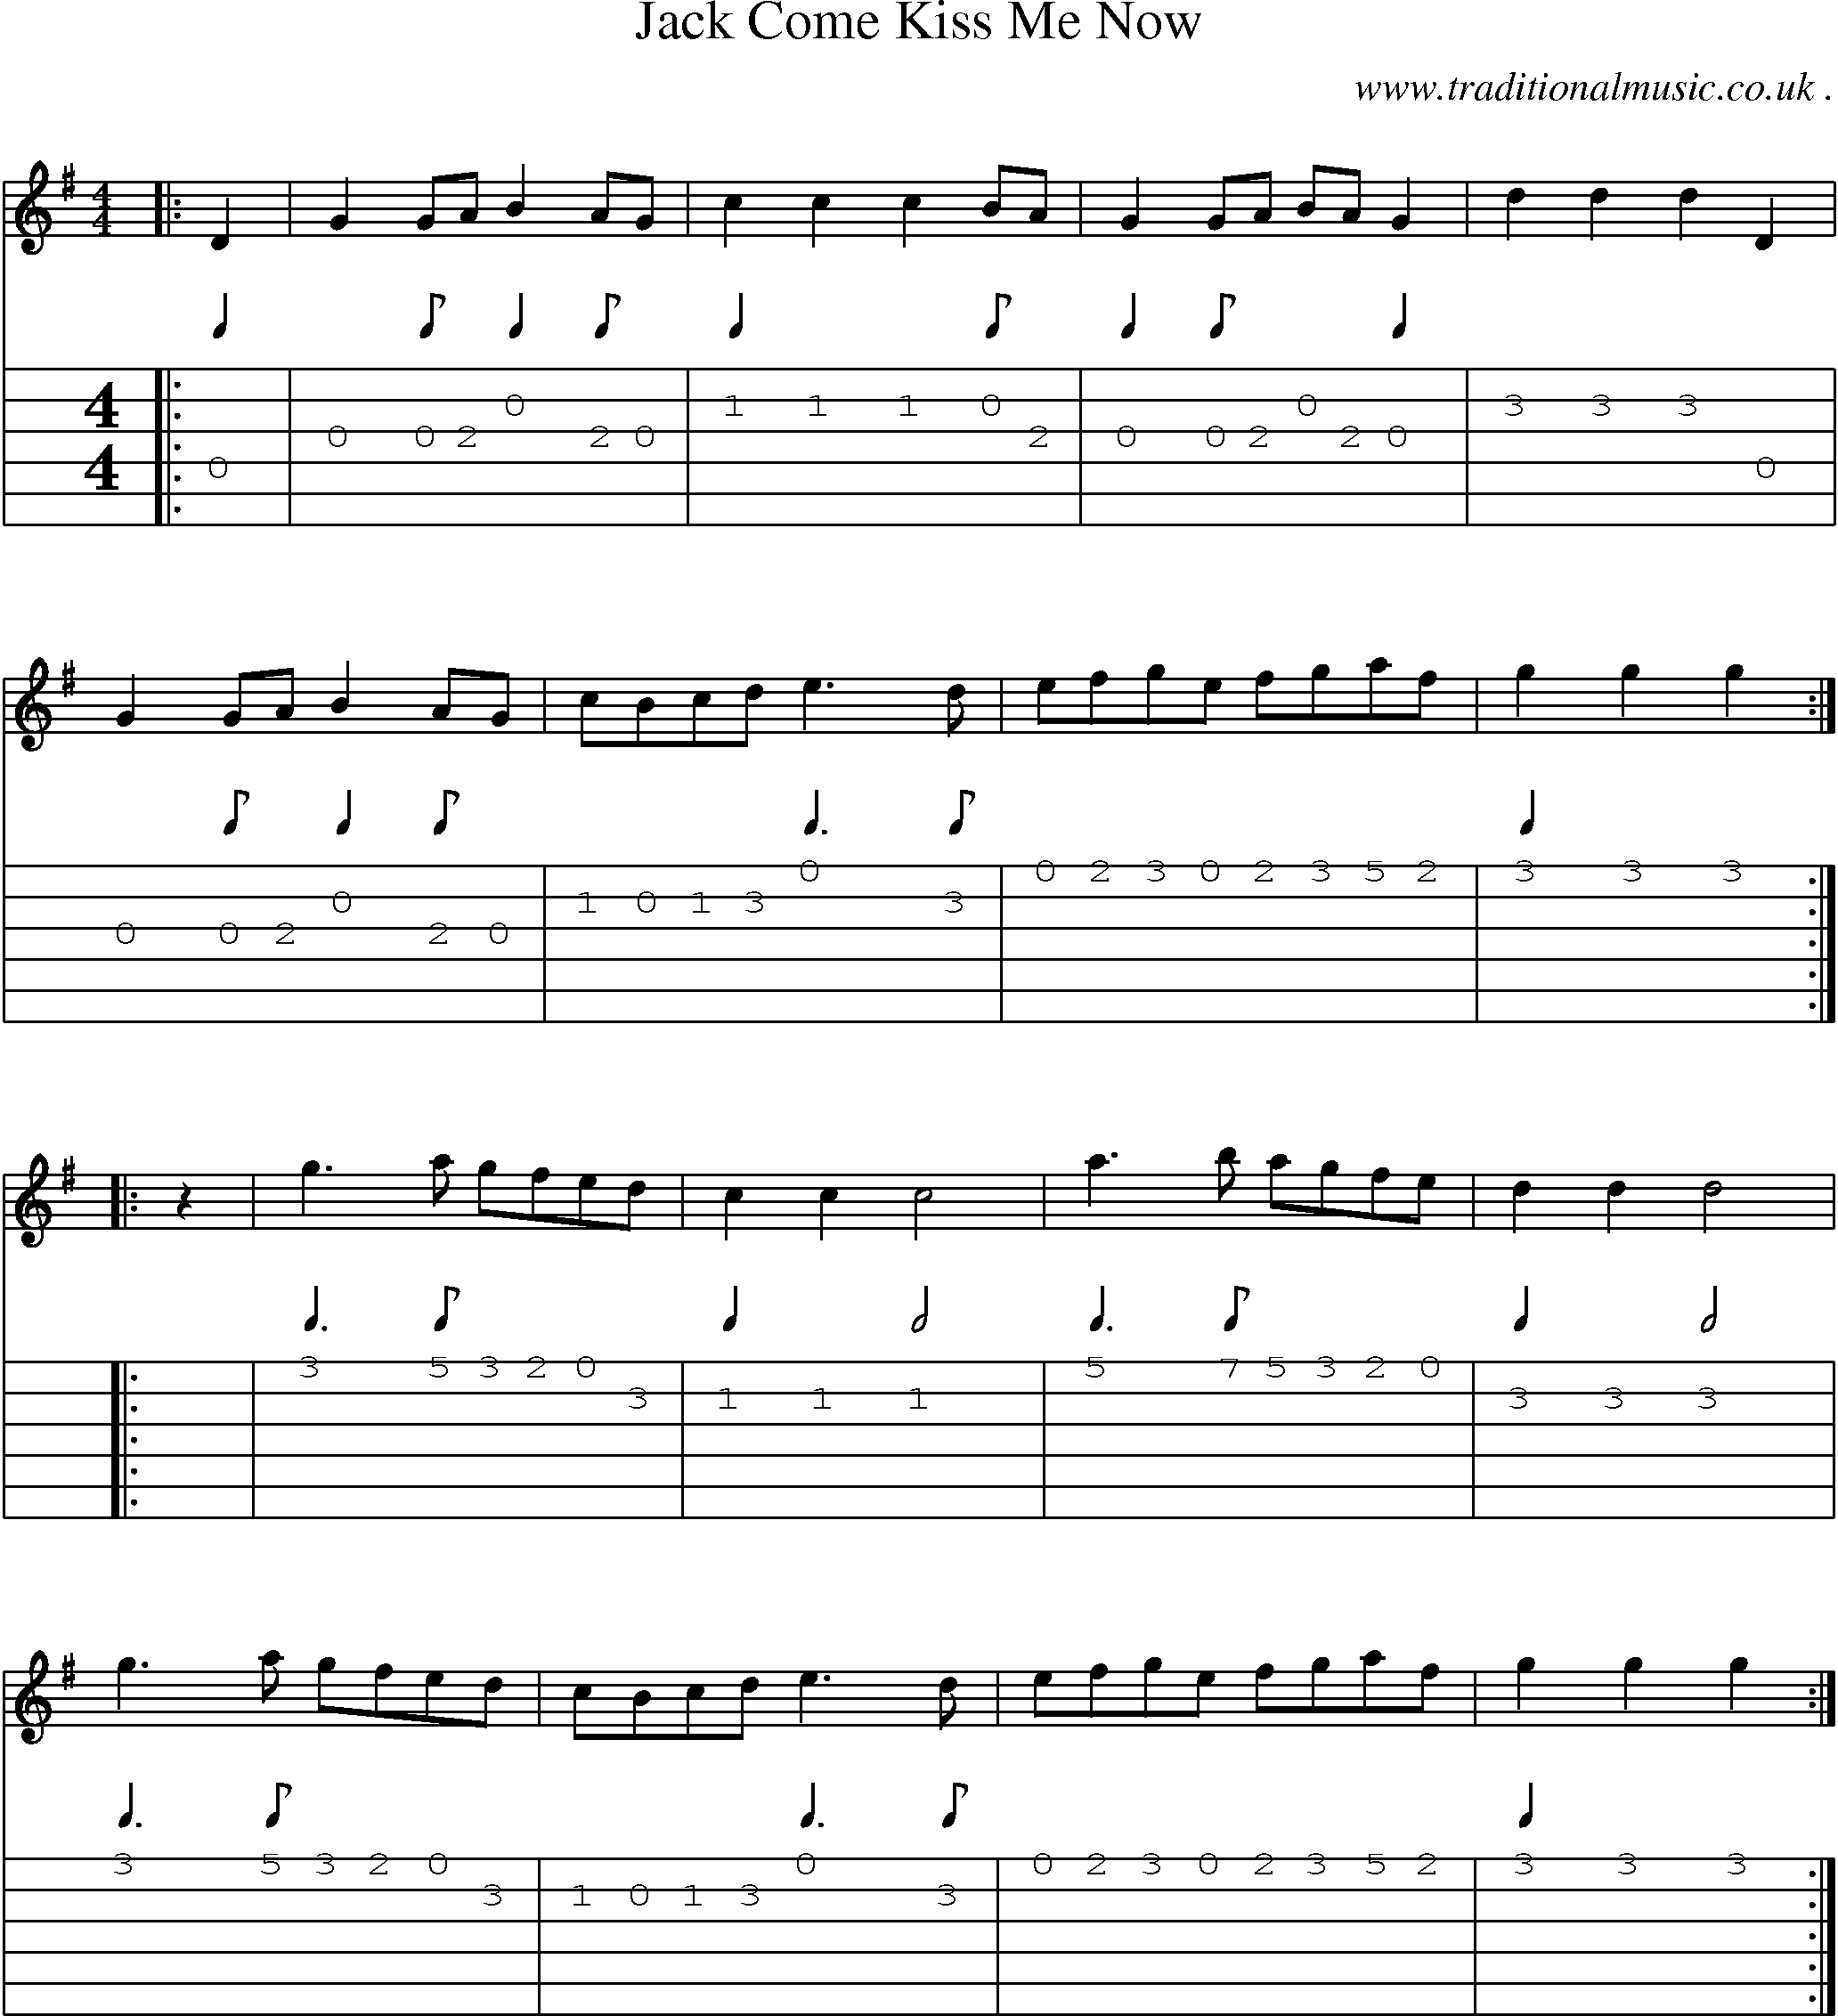 Sheet-Music and Guitar Tabs for Jack Come Kiss Me Now